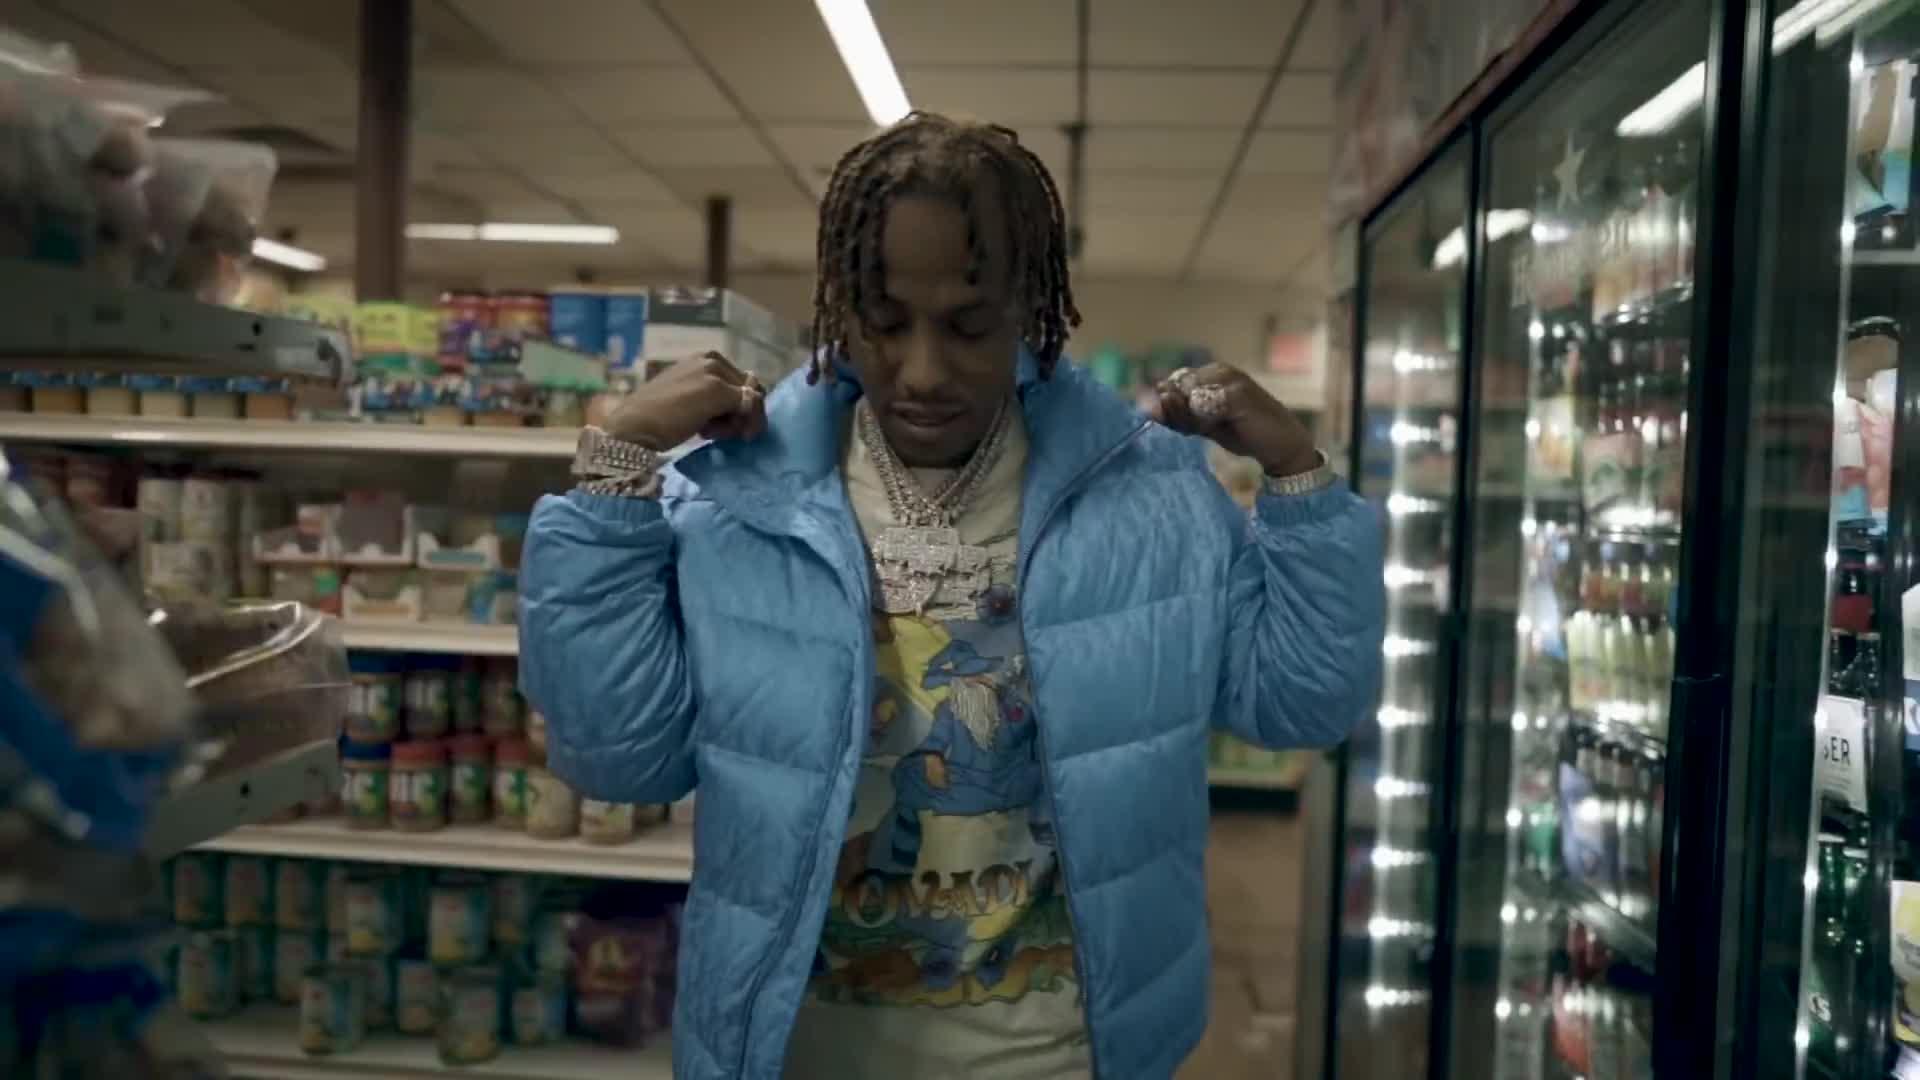 Rich The Kid - Easy